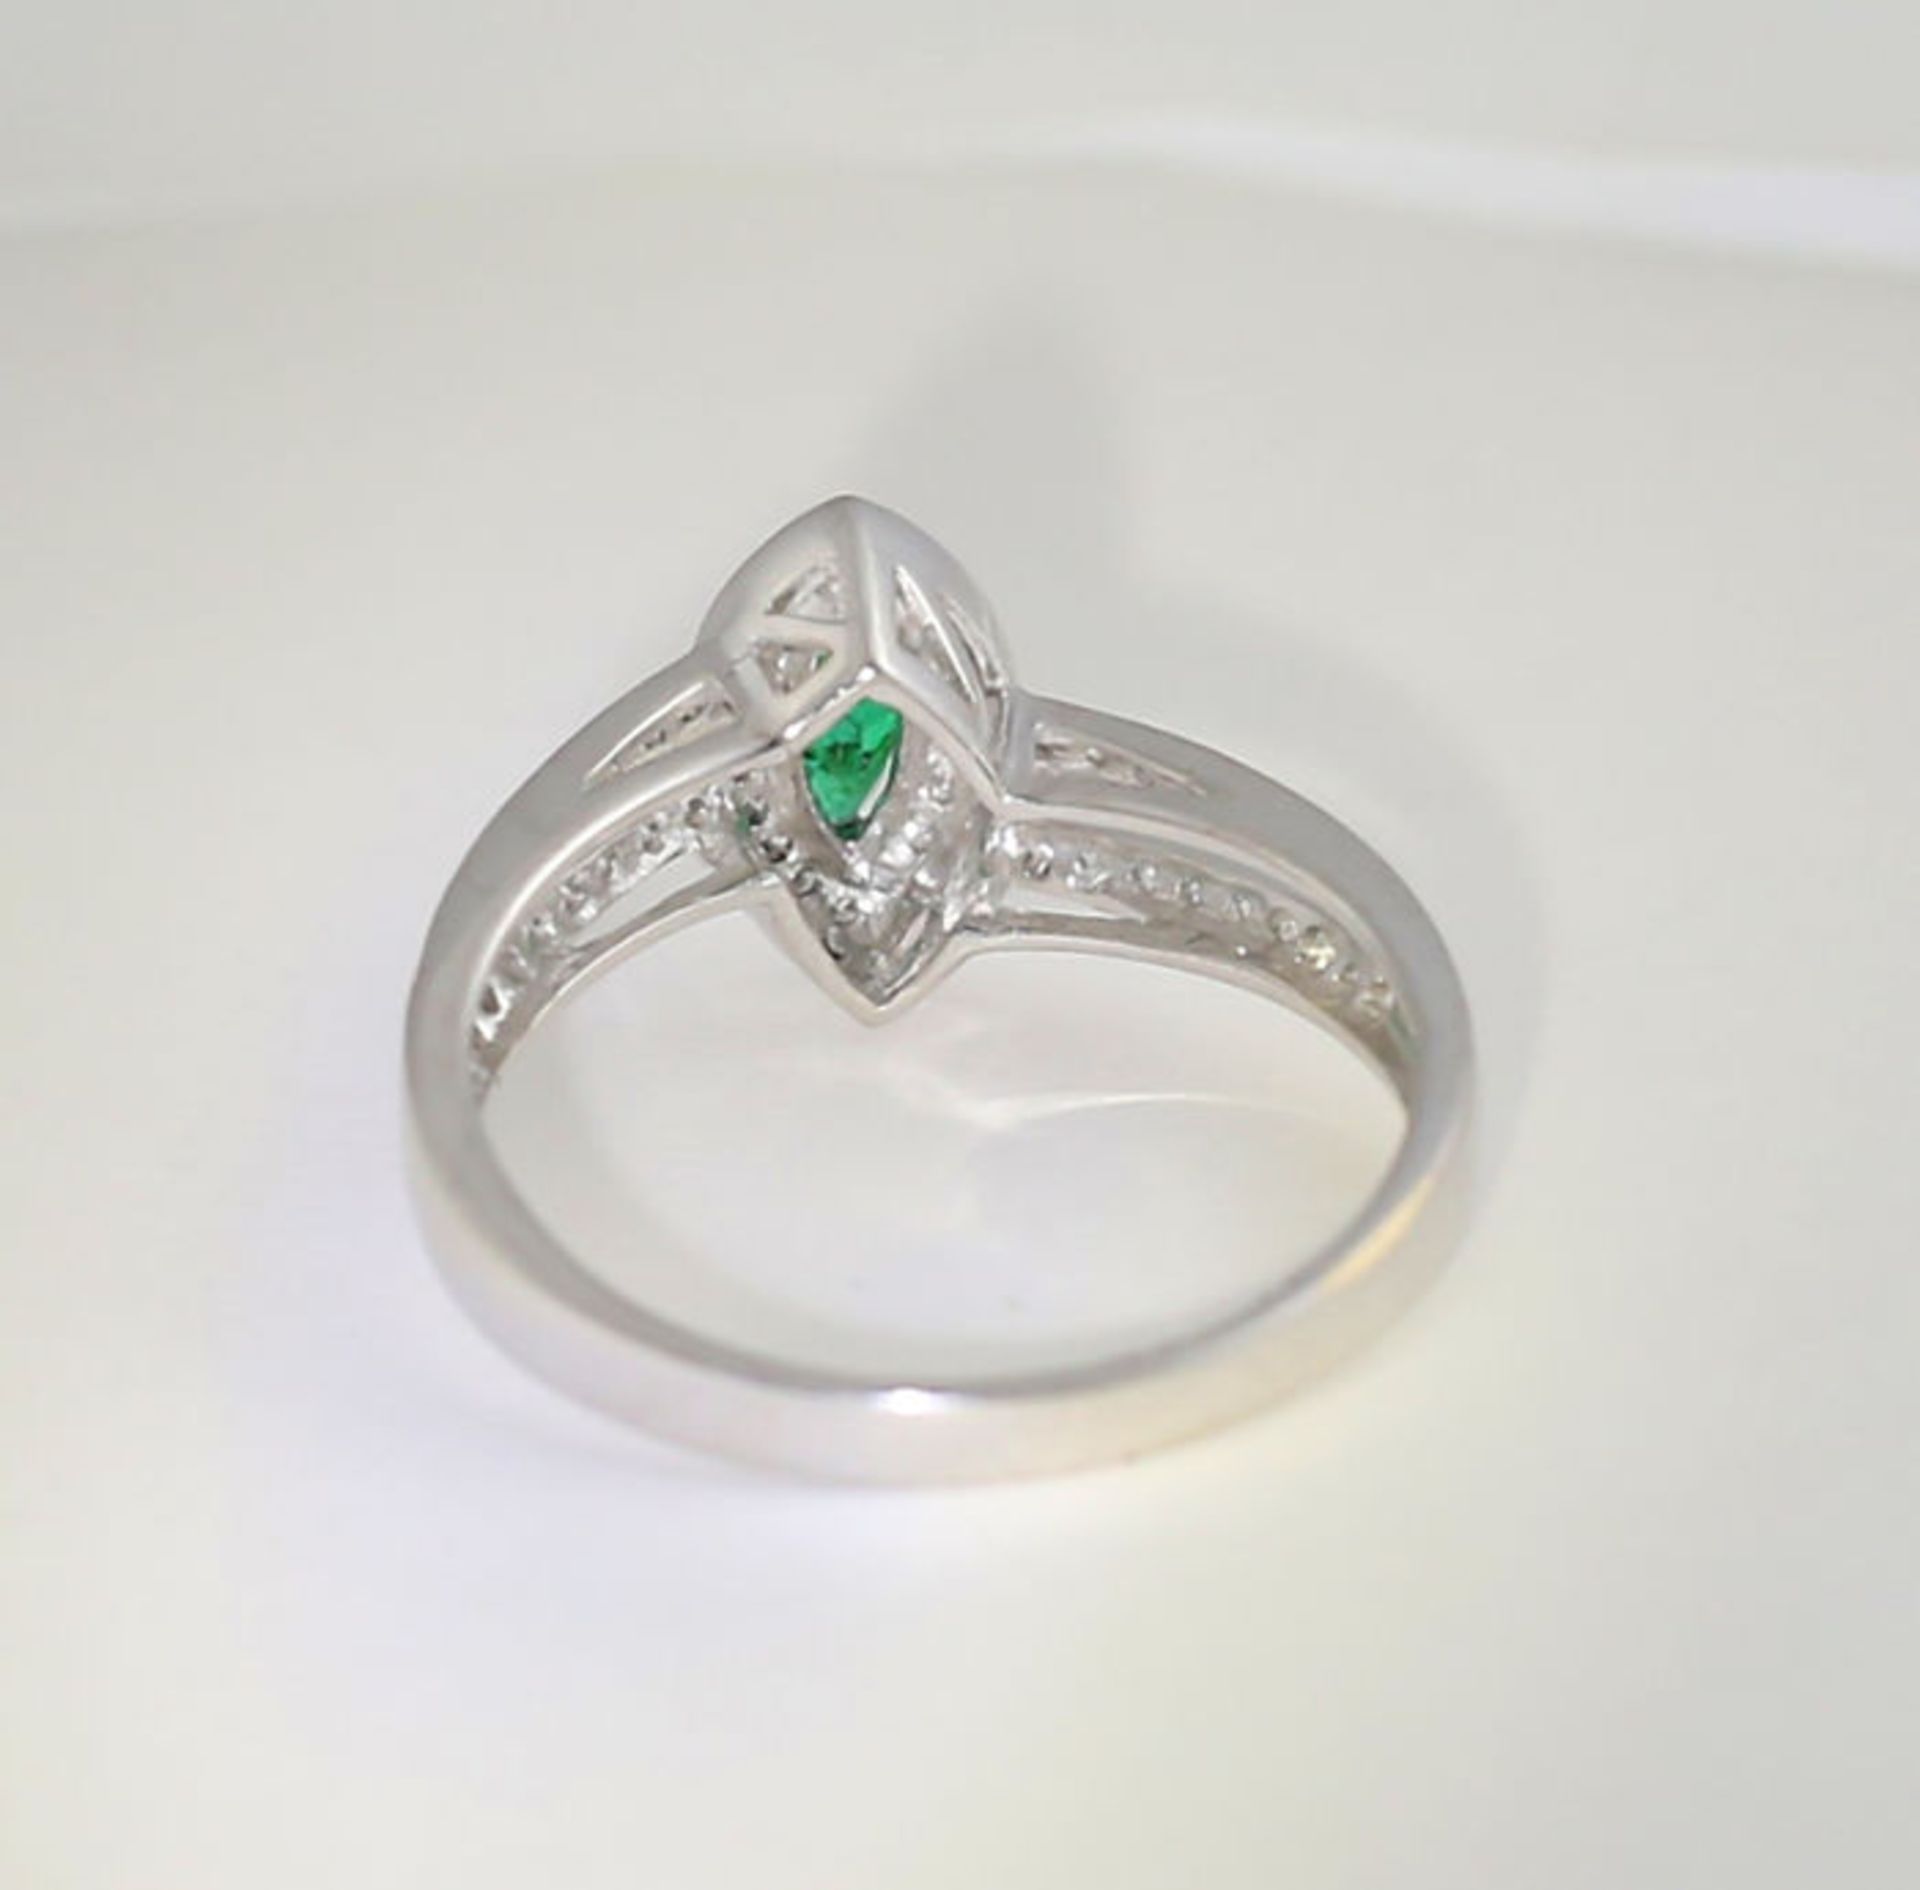 18 K / 750 White Gold Emerald and Diamond Ring - Image 6 of 6